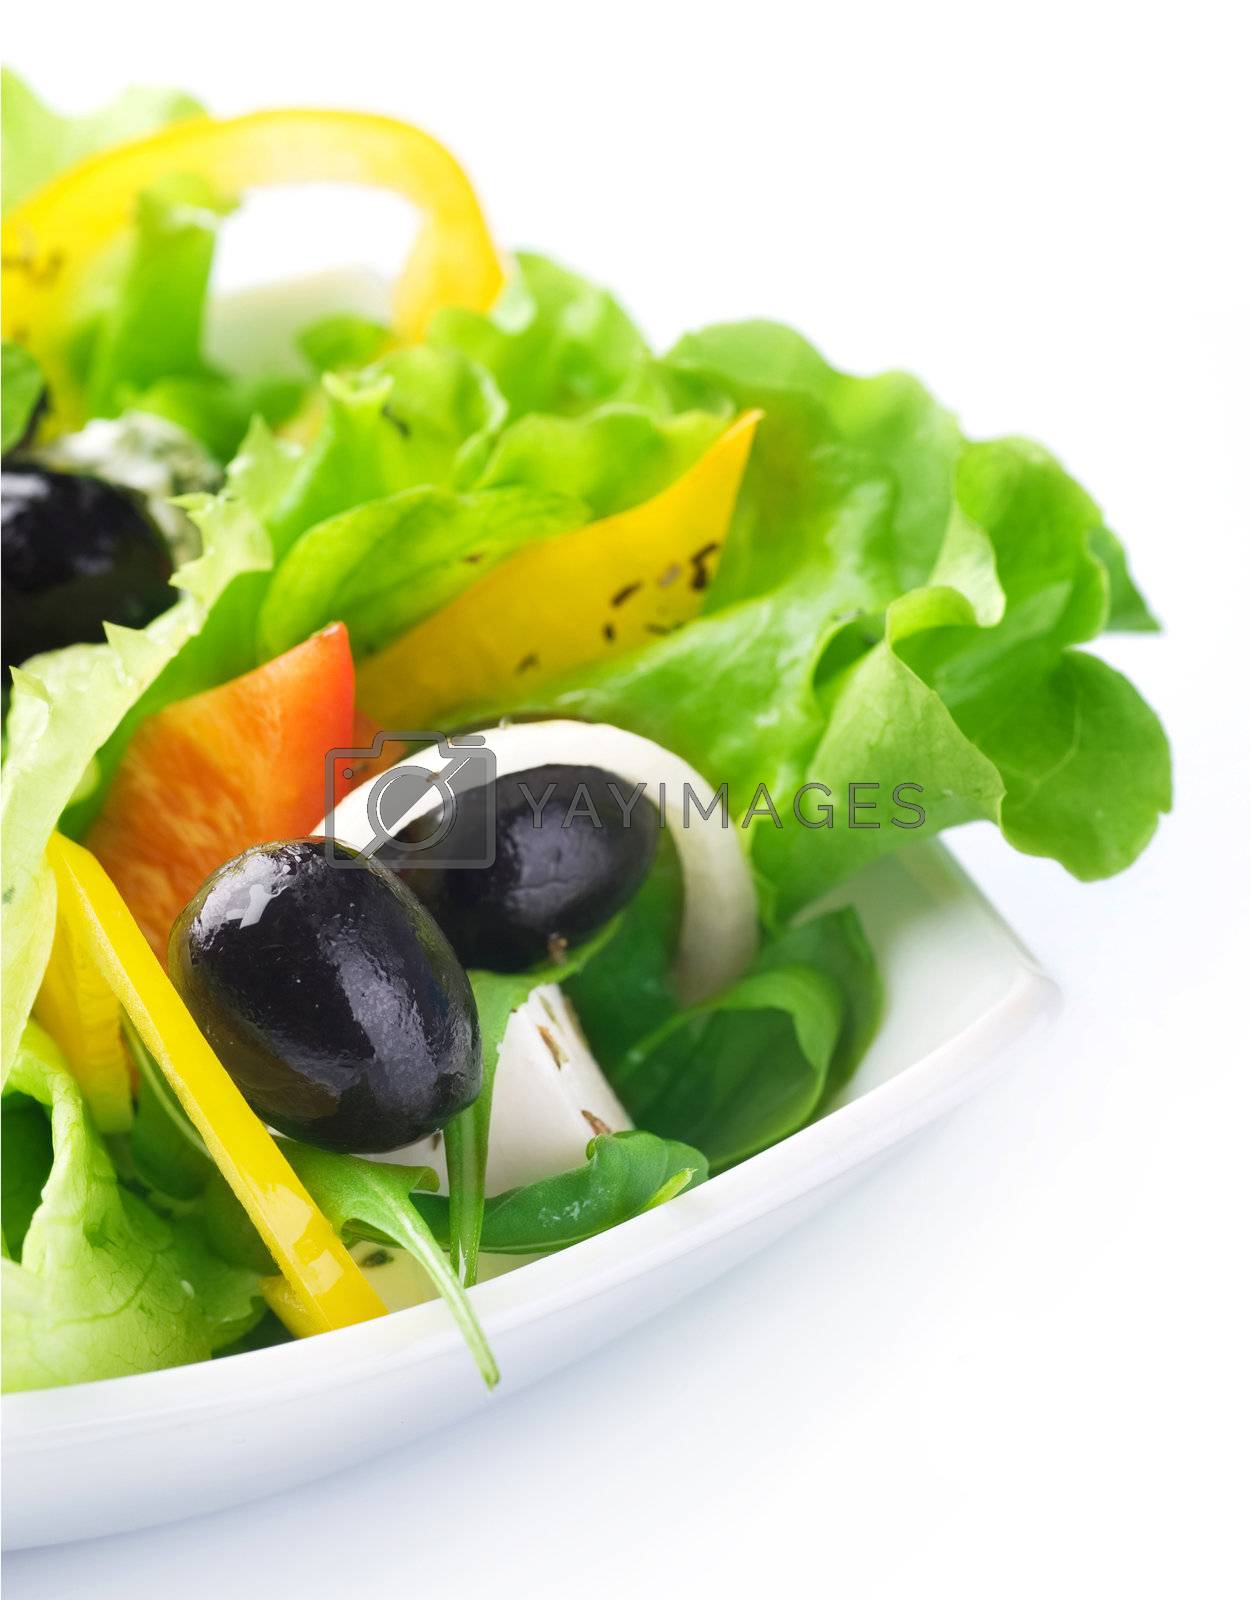 Royalty free image of Salad. Healthy eating concept by SubbotinaA